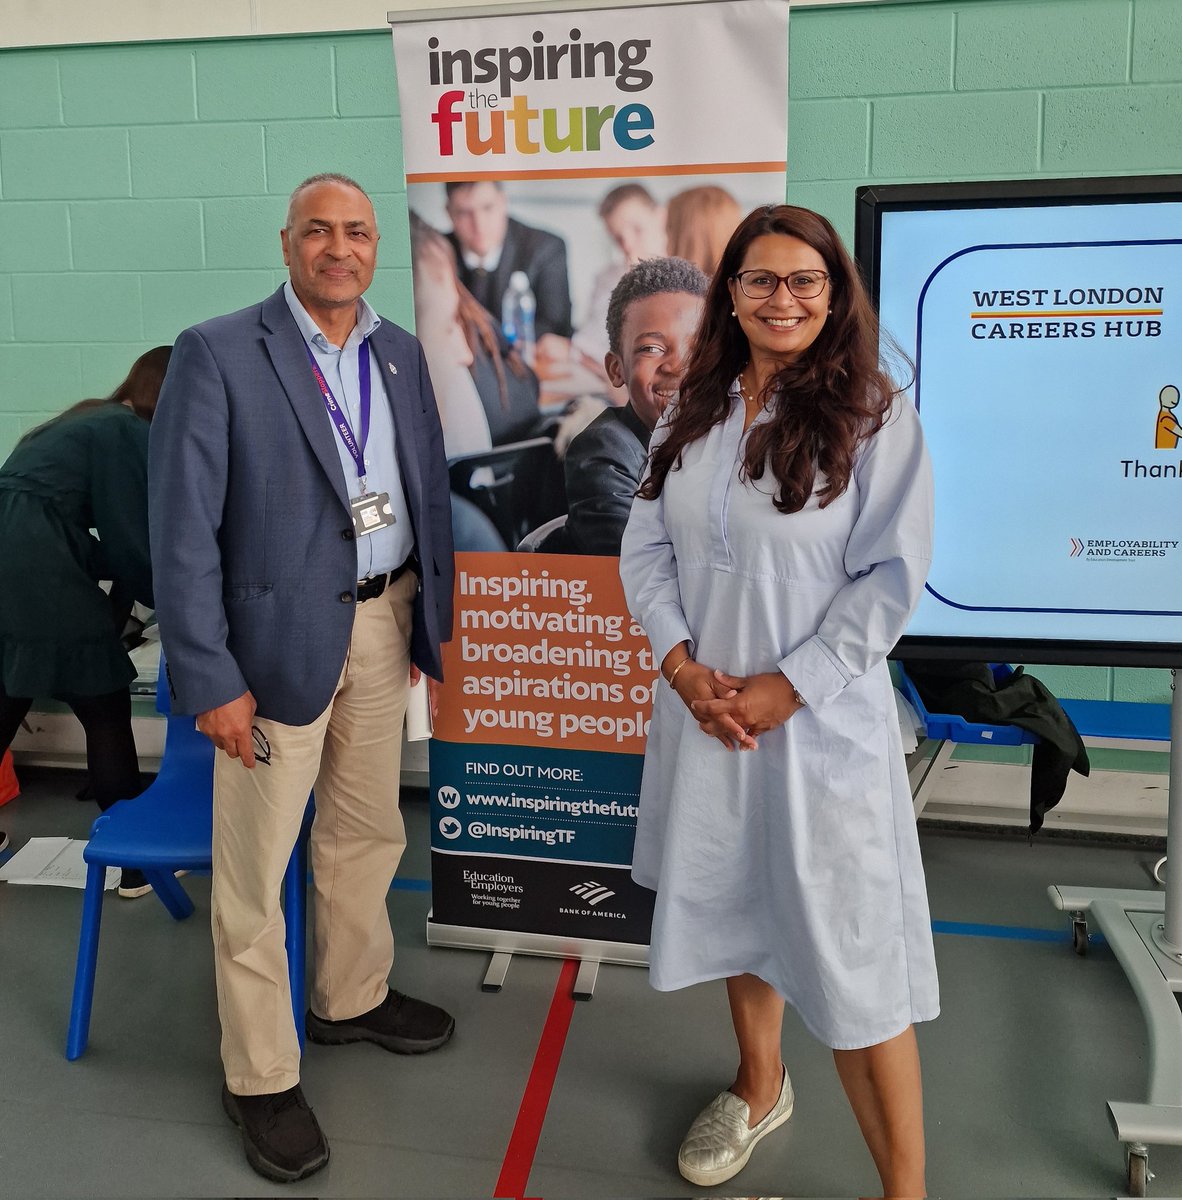 Such a great wonderful work done by @InspiringTF - and here’s is one of our member @DrFJameel with me toady at a volunteer career event.